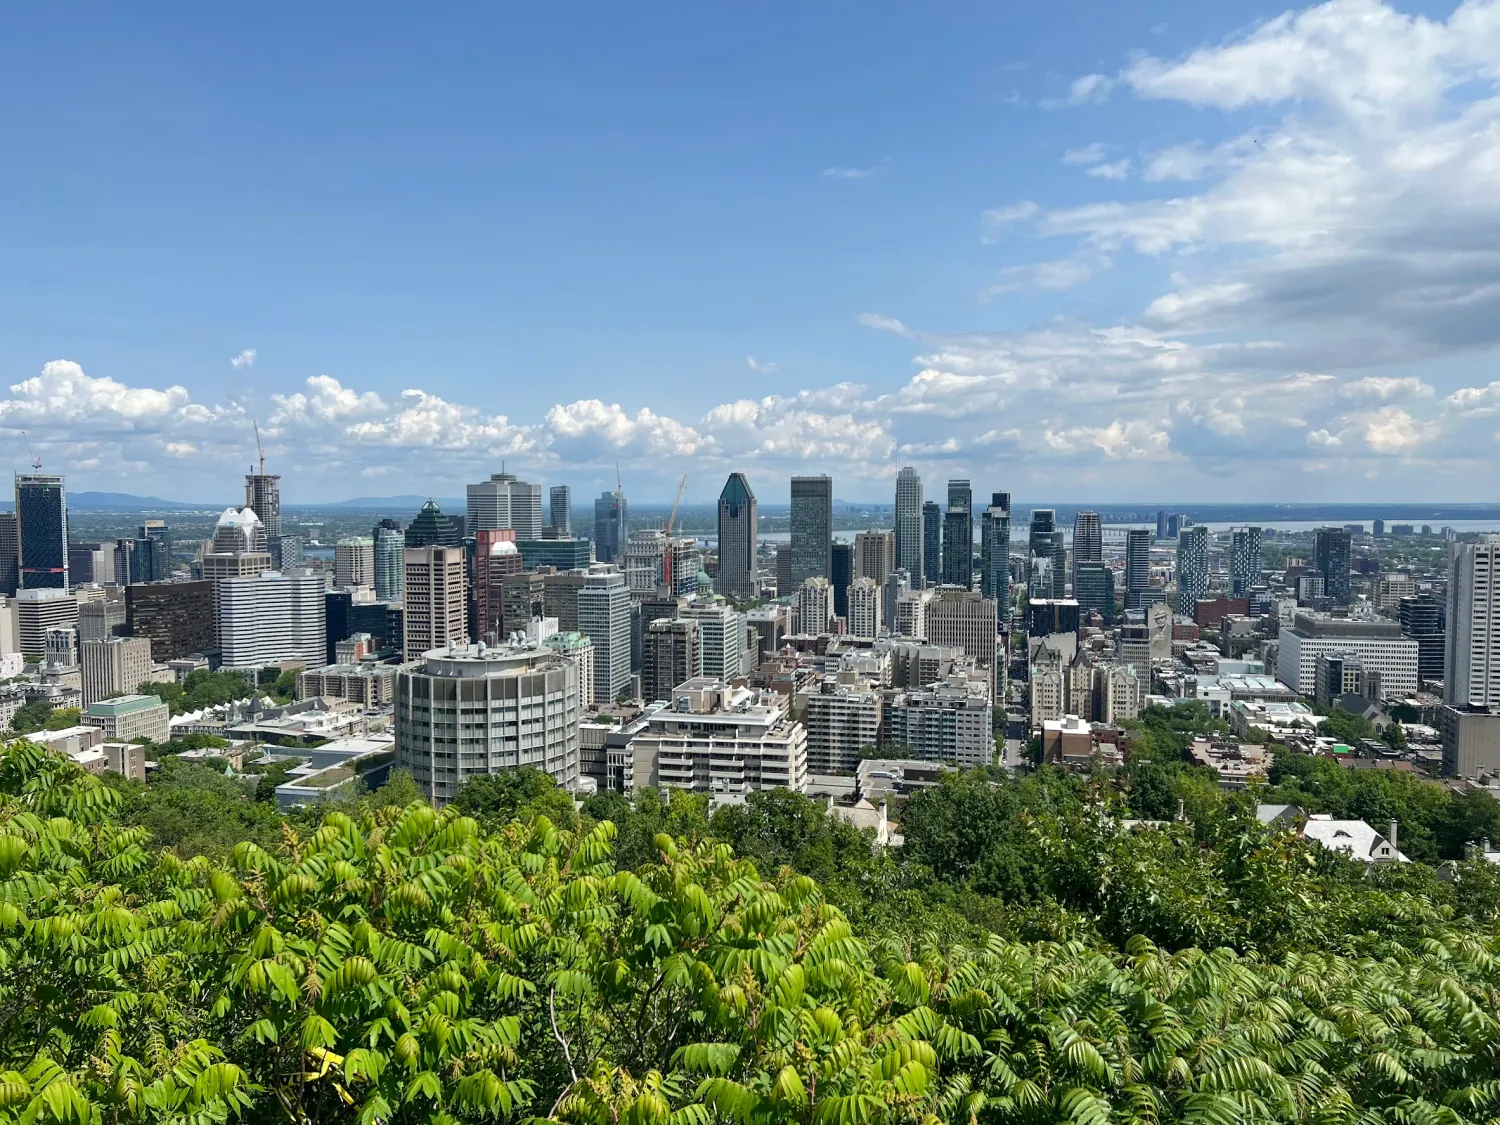 The view from the top of Mount Royal.